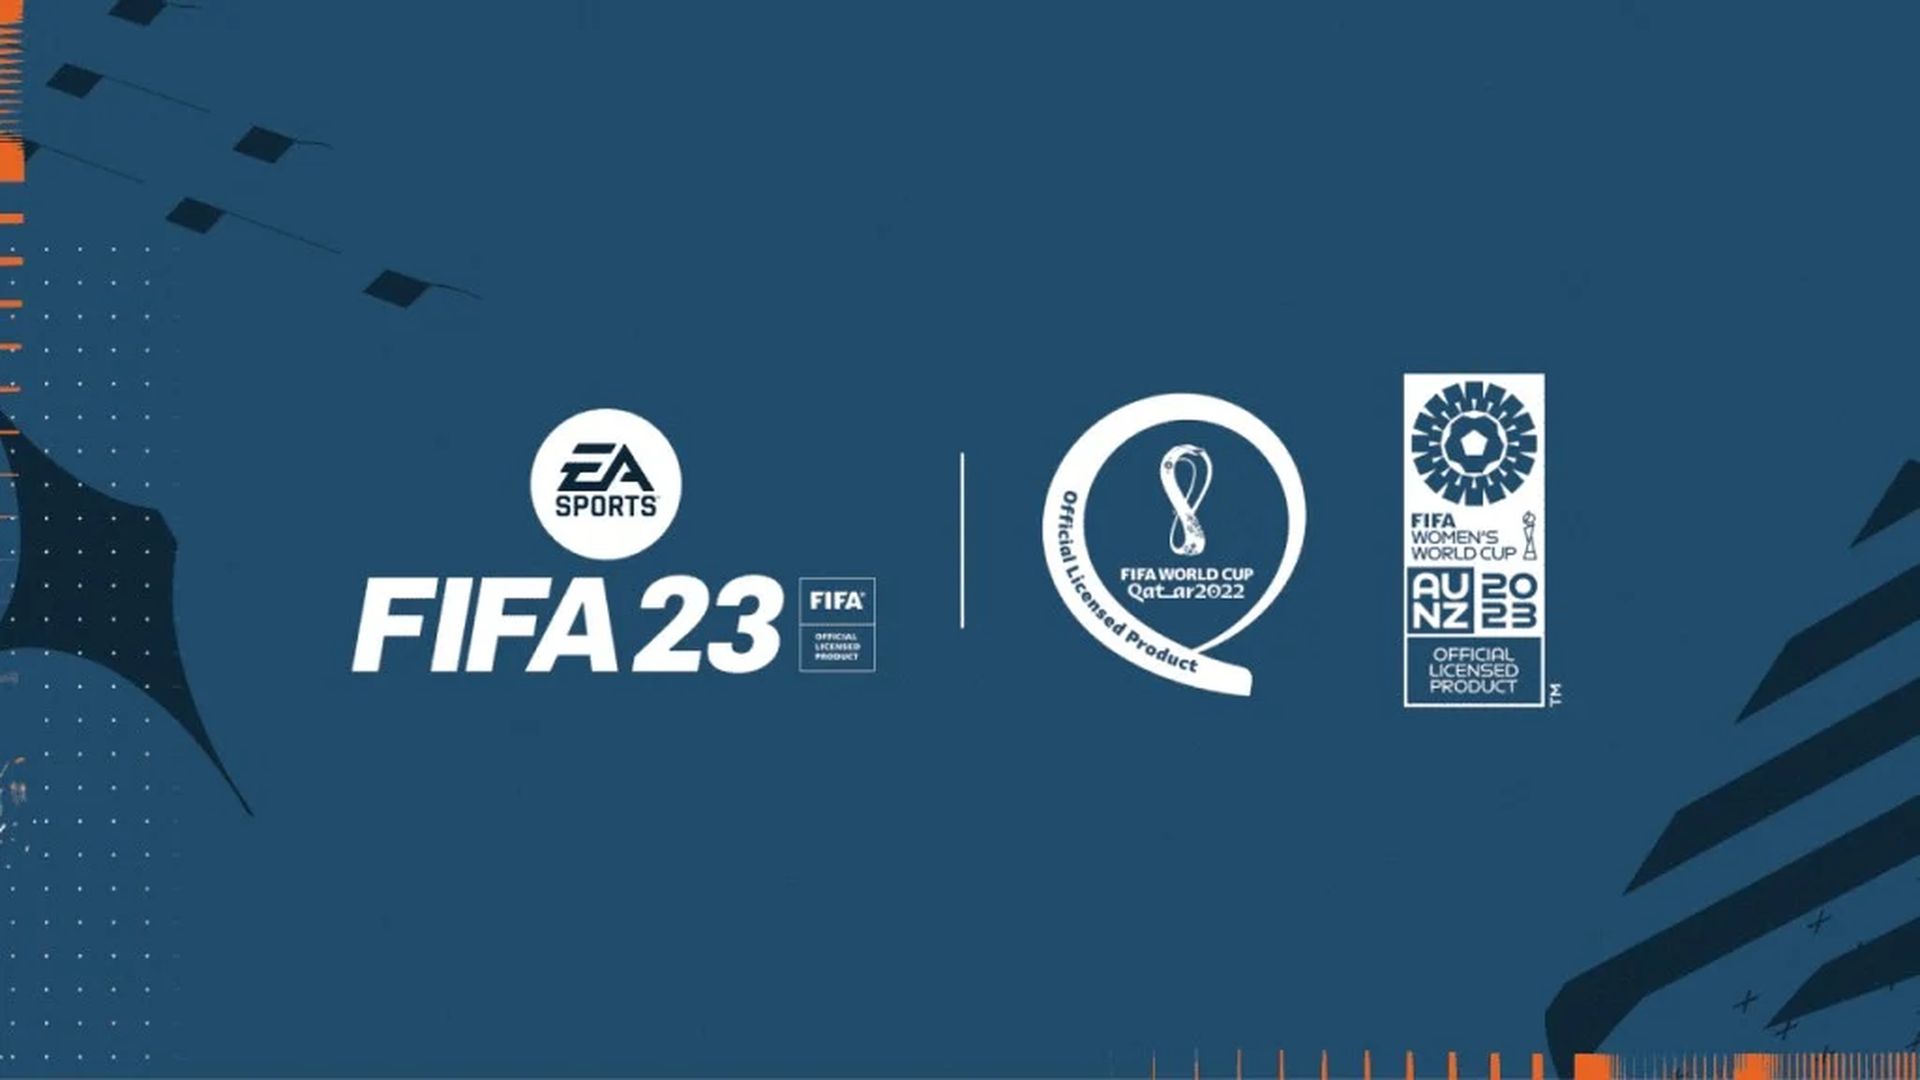 The FIFA 23 trailer was released a few hours ago. We will see Sam Kerr and Kylian Mbappé on the FIFA 23 cover.